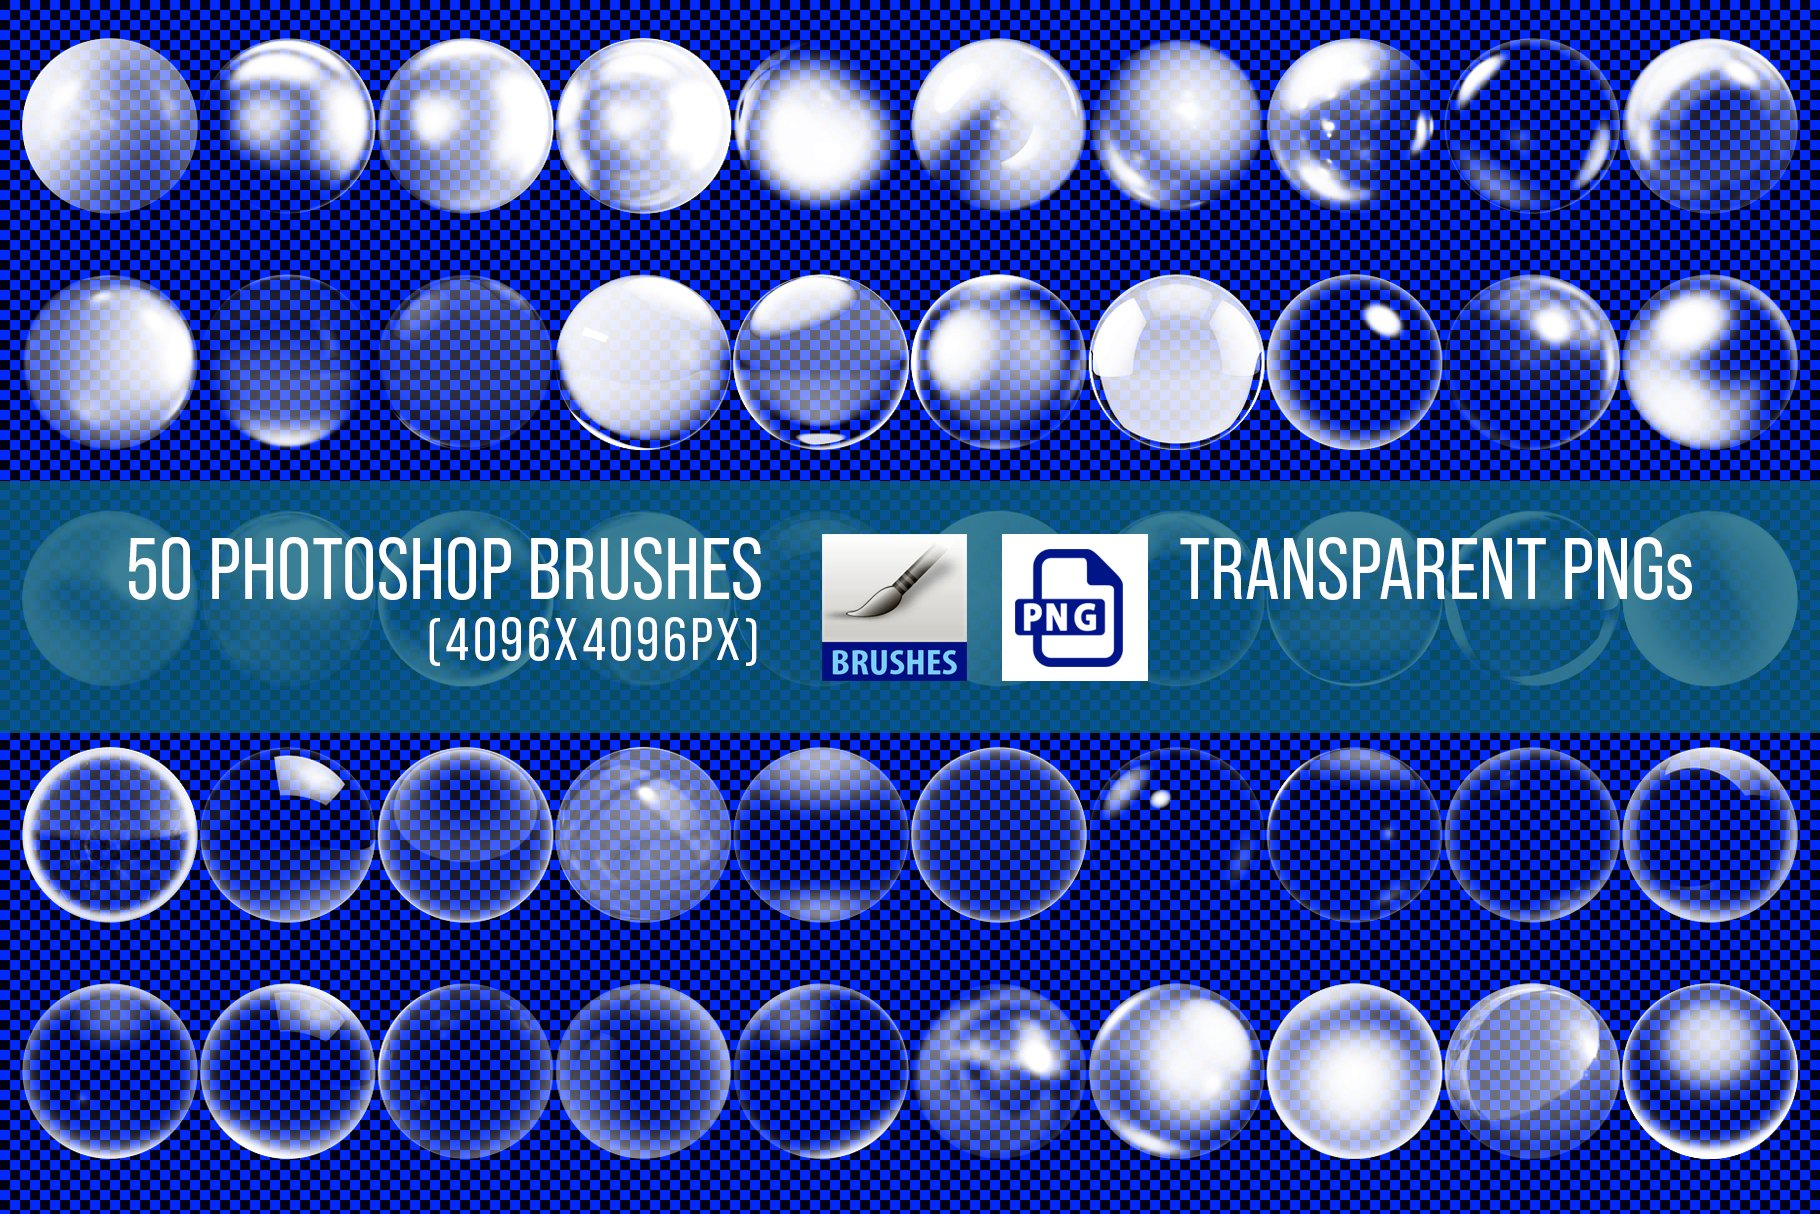 50 PS Sphere Brushes and PNGscover image.